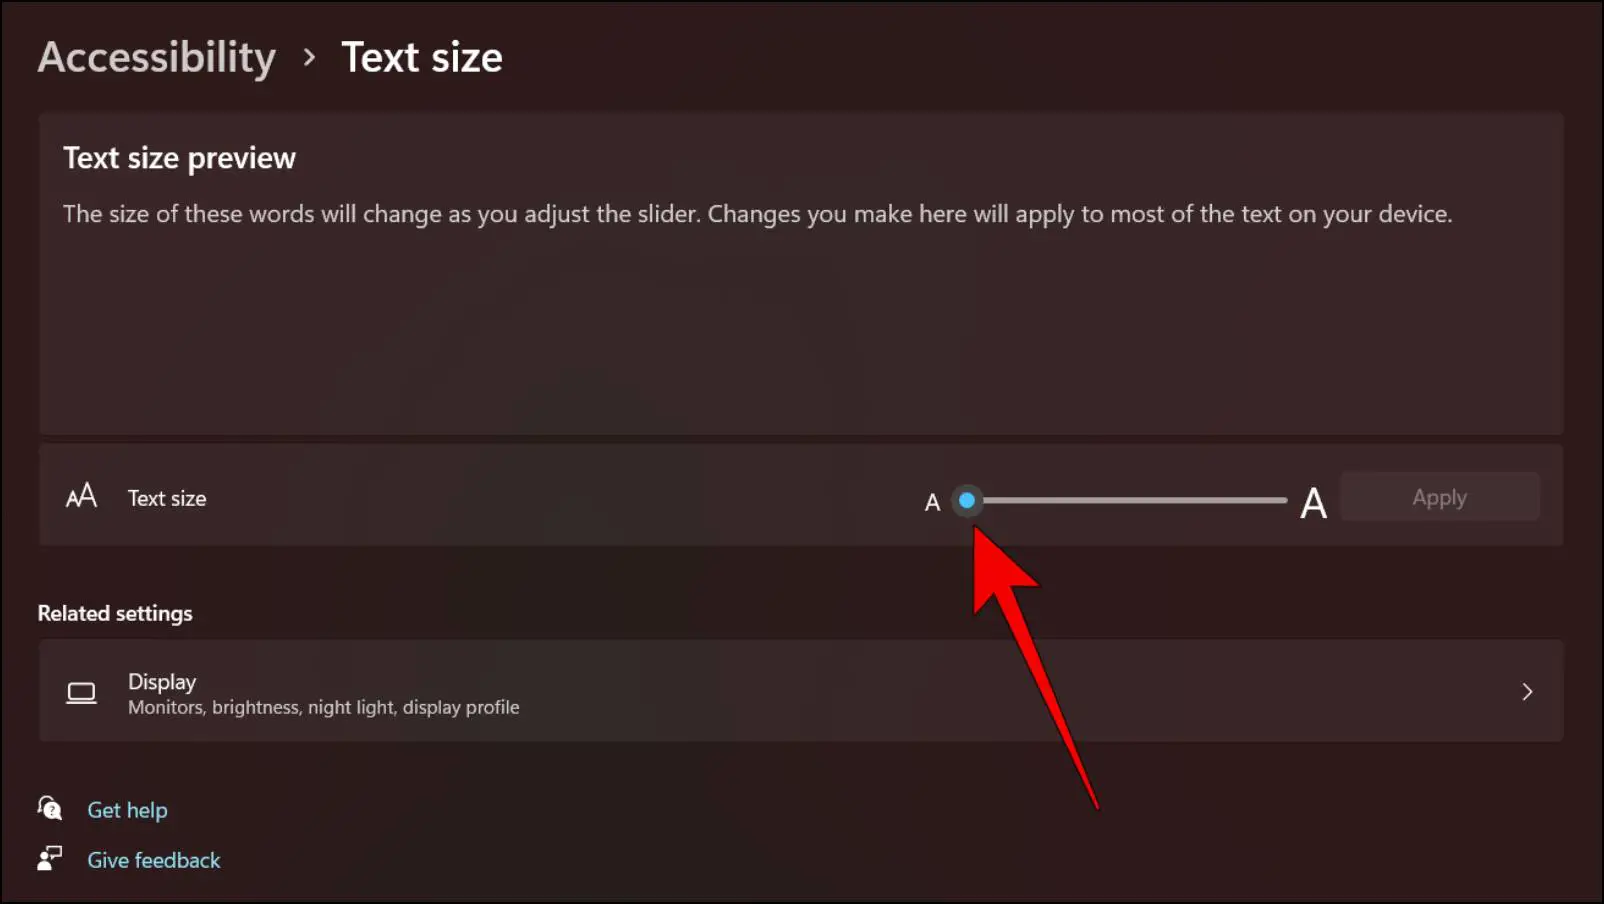 Drag the Slider Next to Text Size to Increase or Decrease Font Size